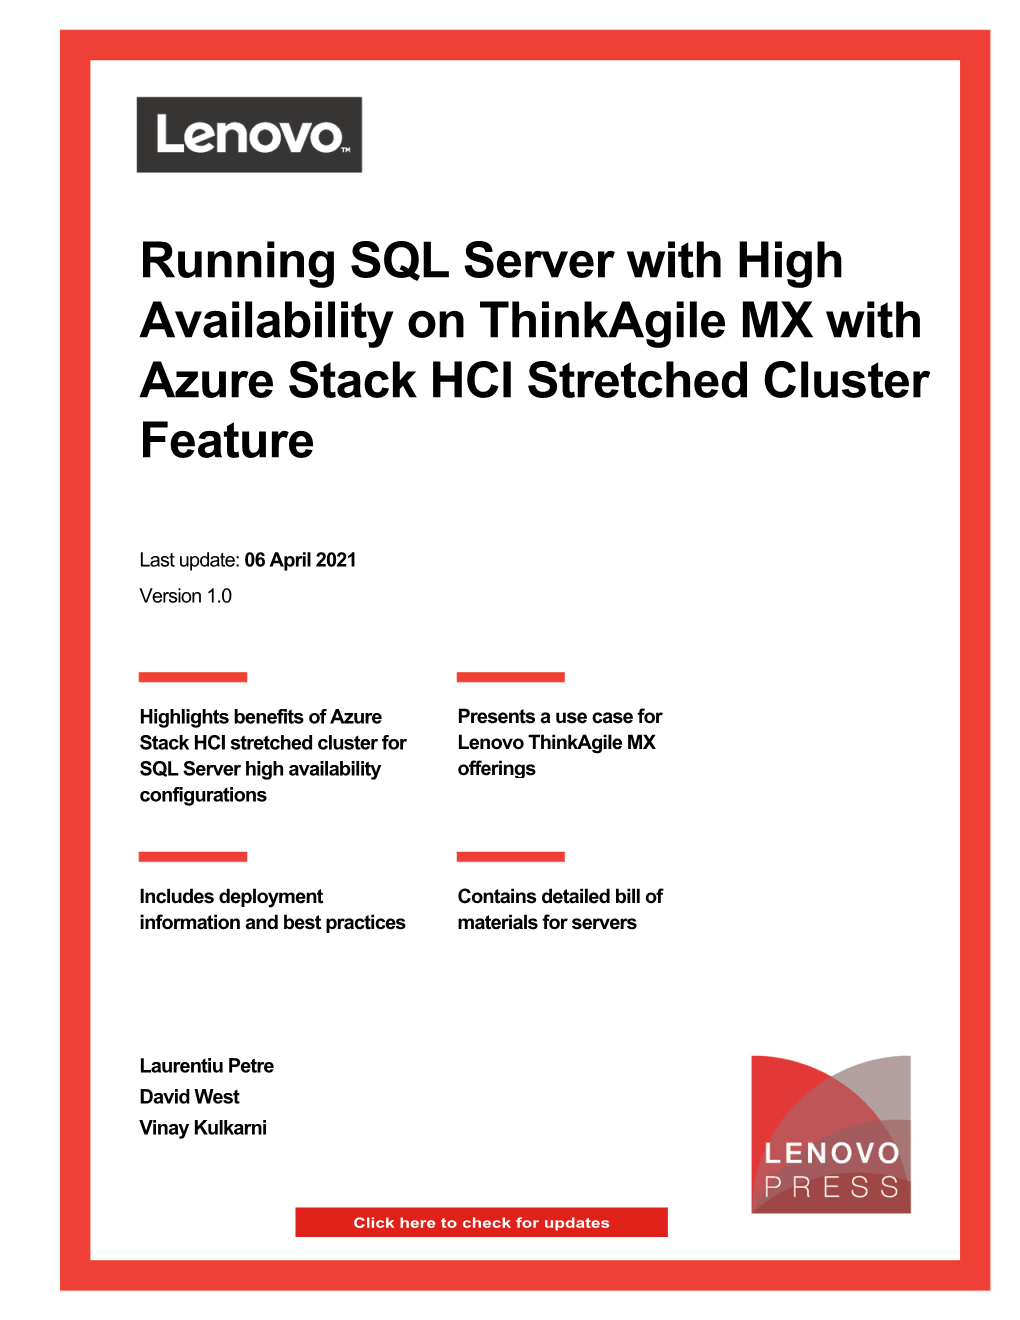 Running SQL Server with High Availability on Thinkagile MX with Azure Stack HCI Stretched Cluster Feature